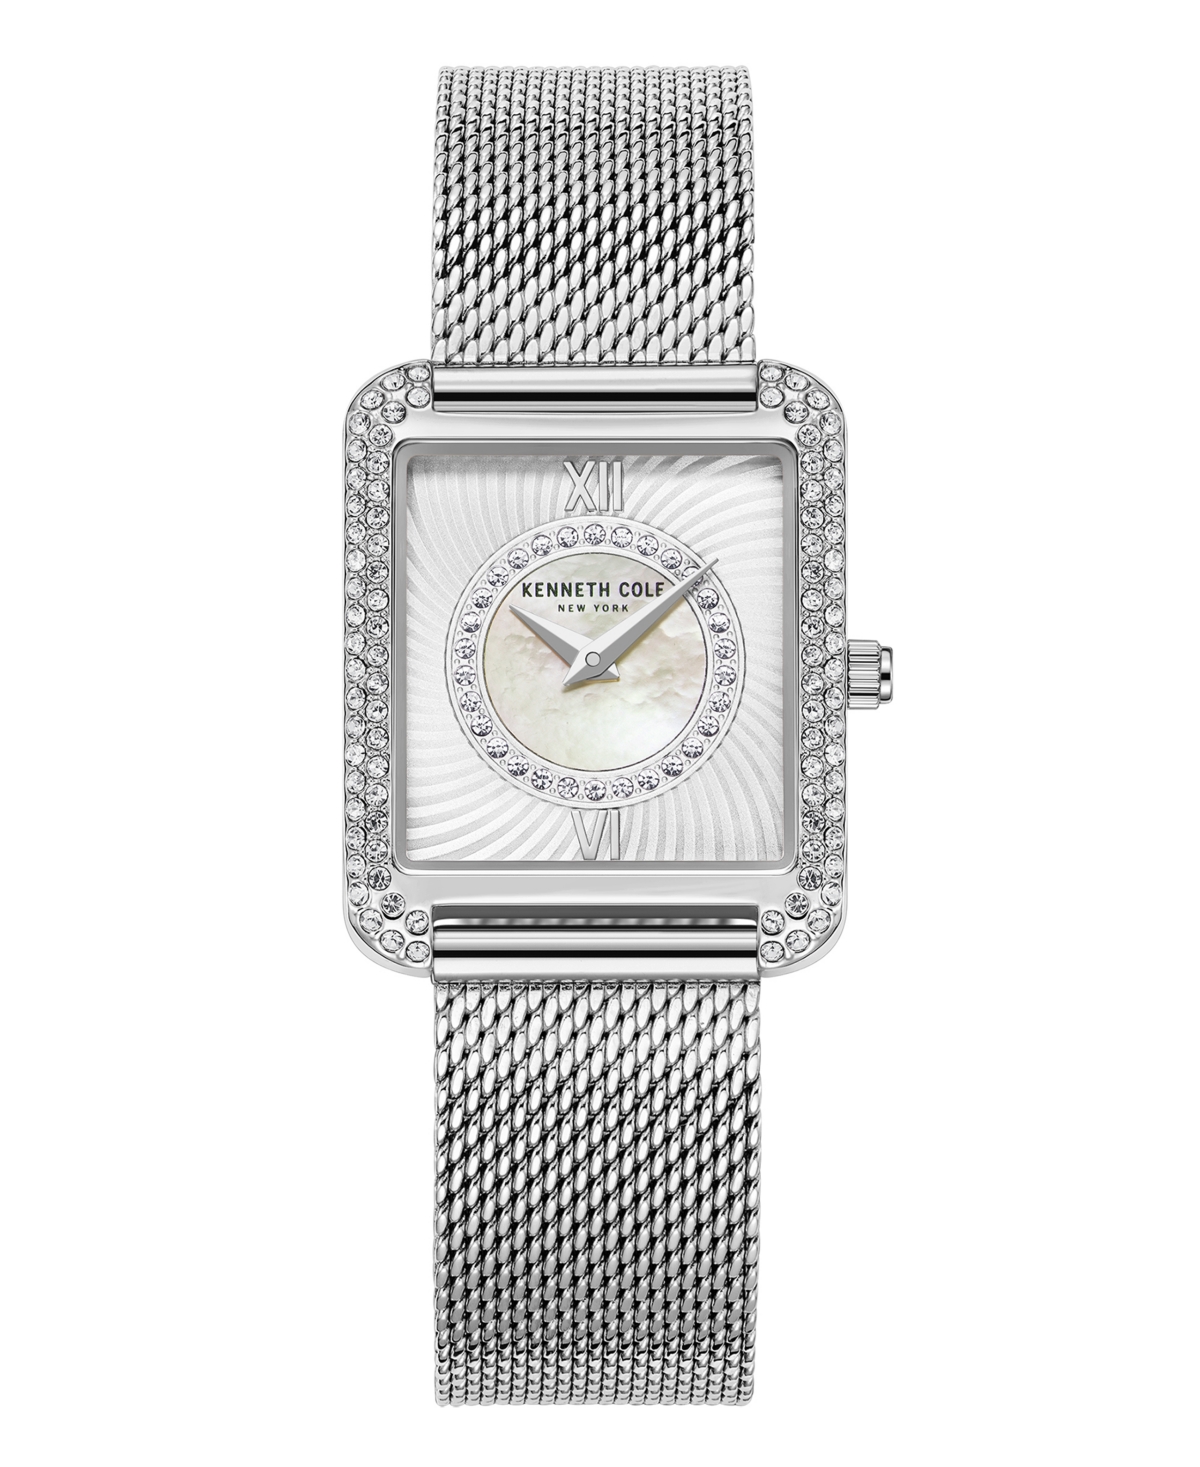 Kenneth Cole New York Women's Classic Silver-Tone Stainless Steel Mesh Bracelet Watch 30.5mm